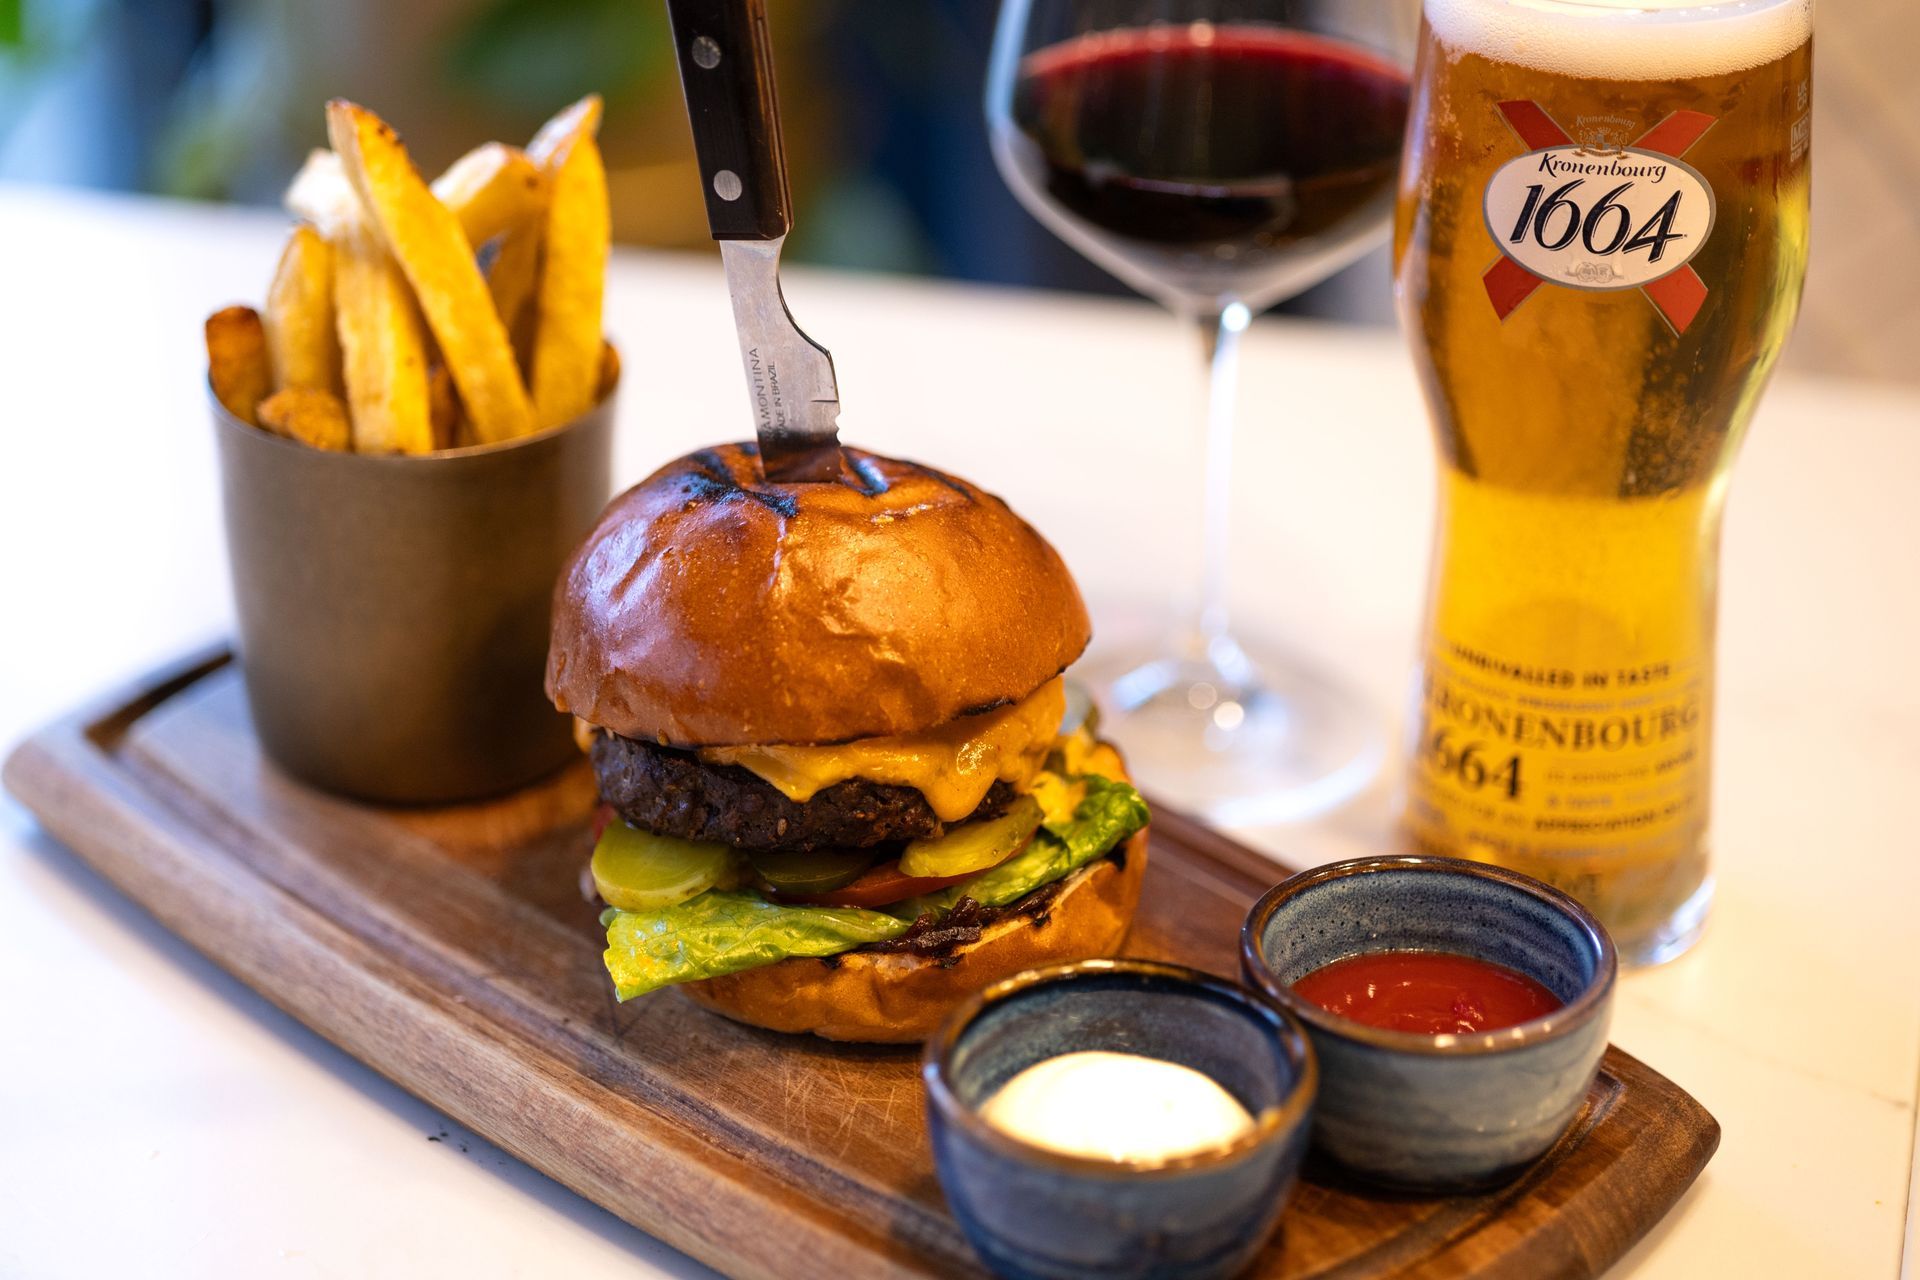 Enjoy a delicious homemade burger, homemade fries and glass of wine (or pint of beer) for £20 